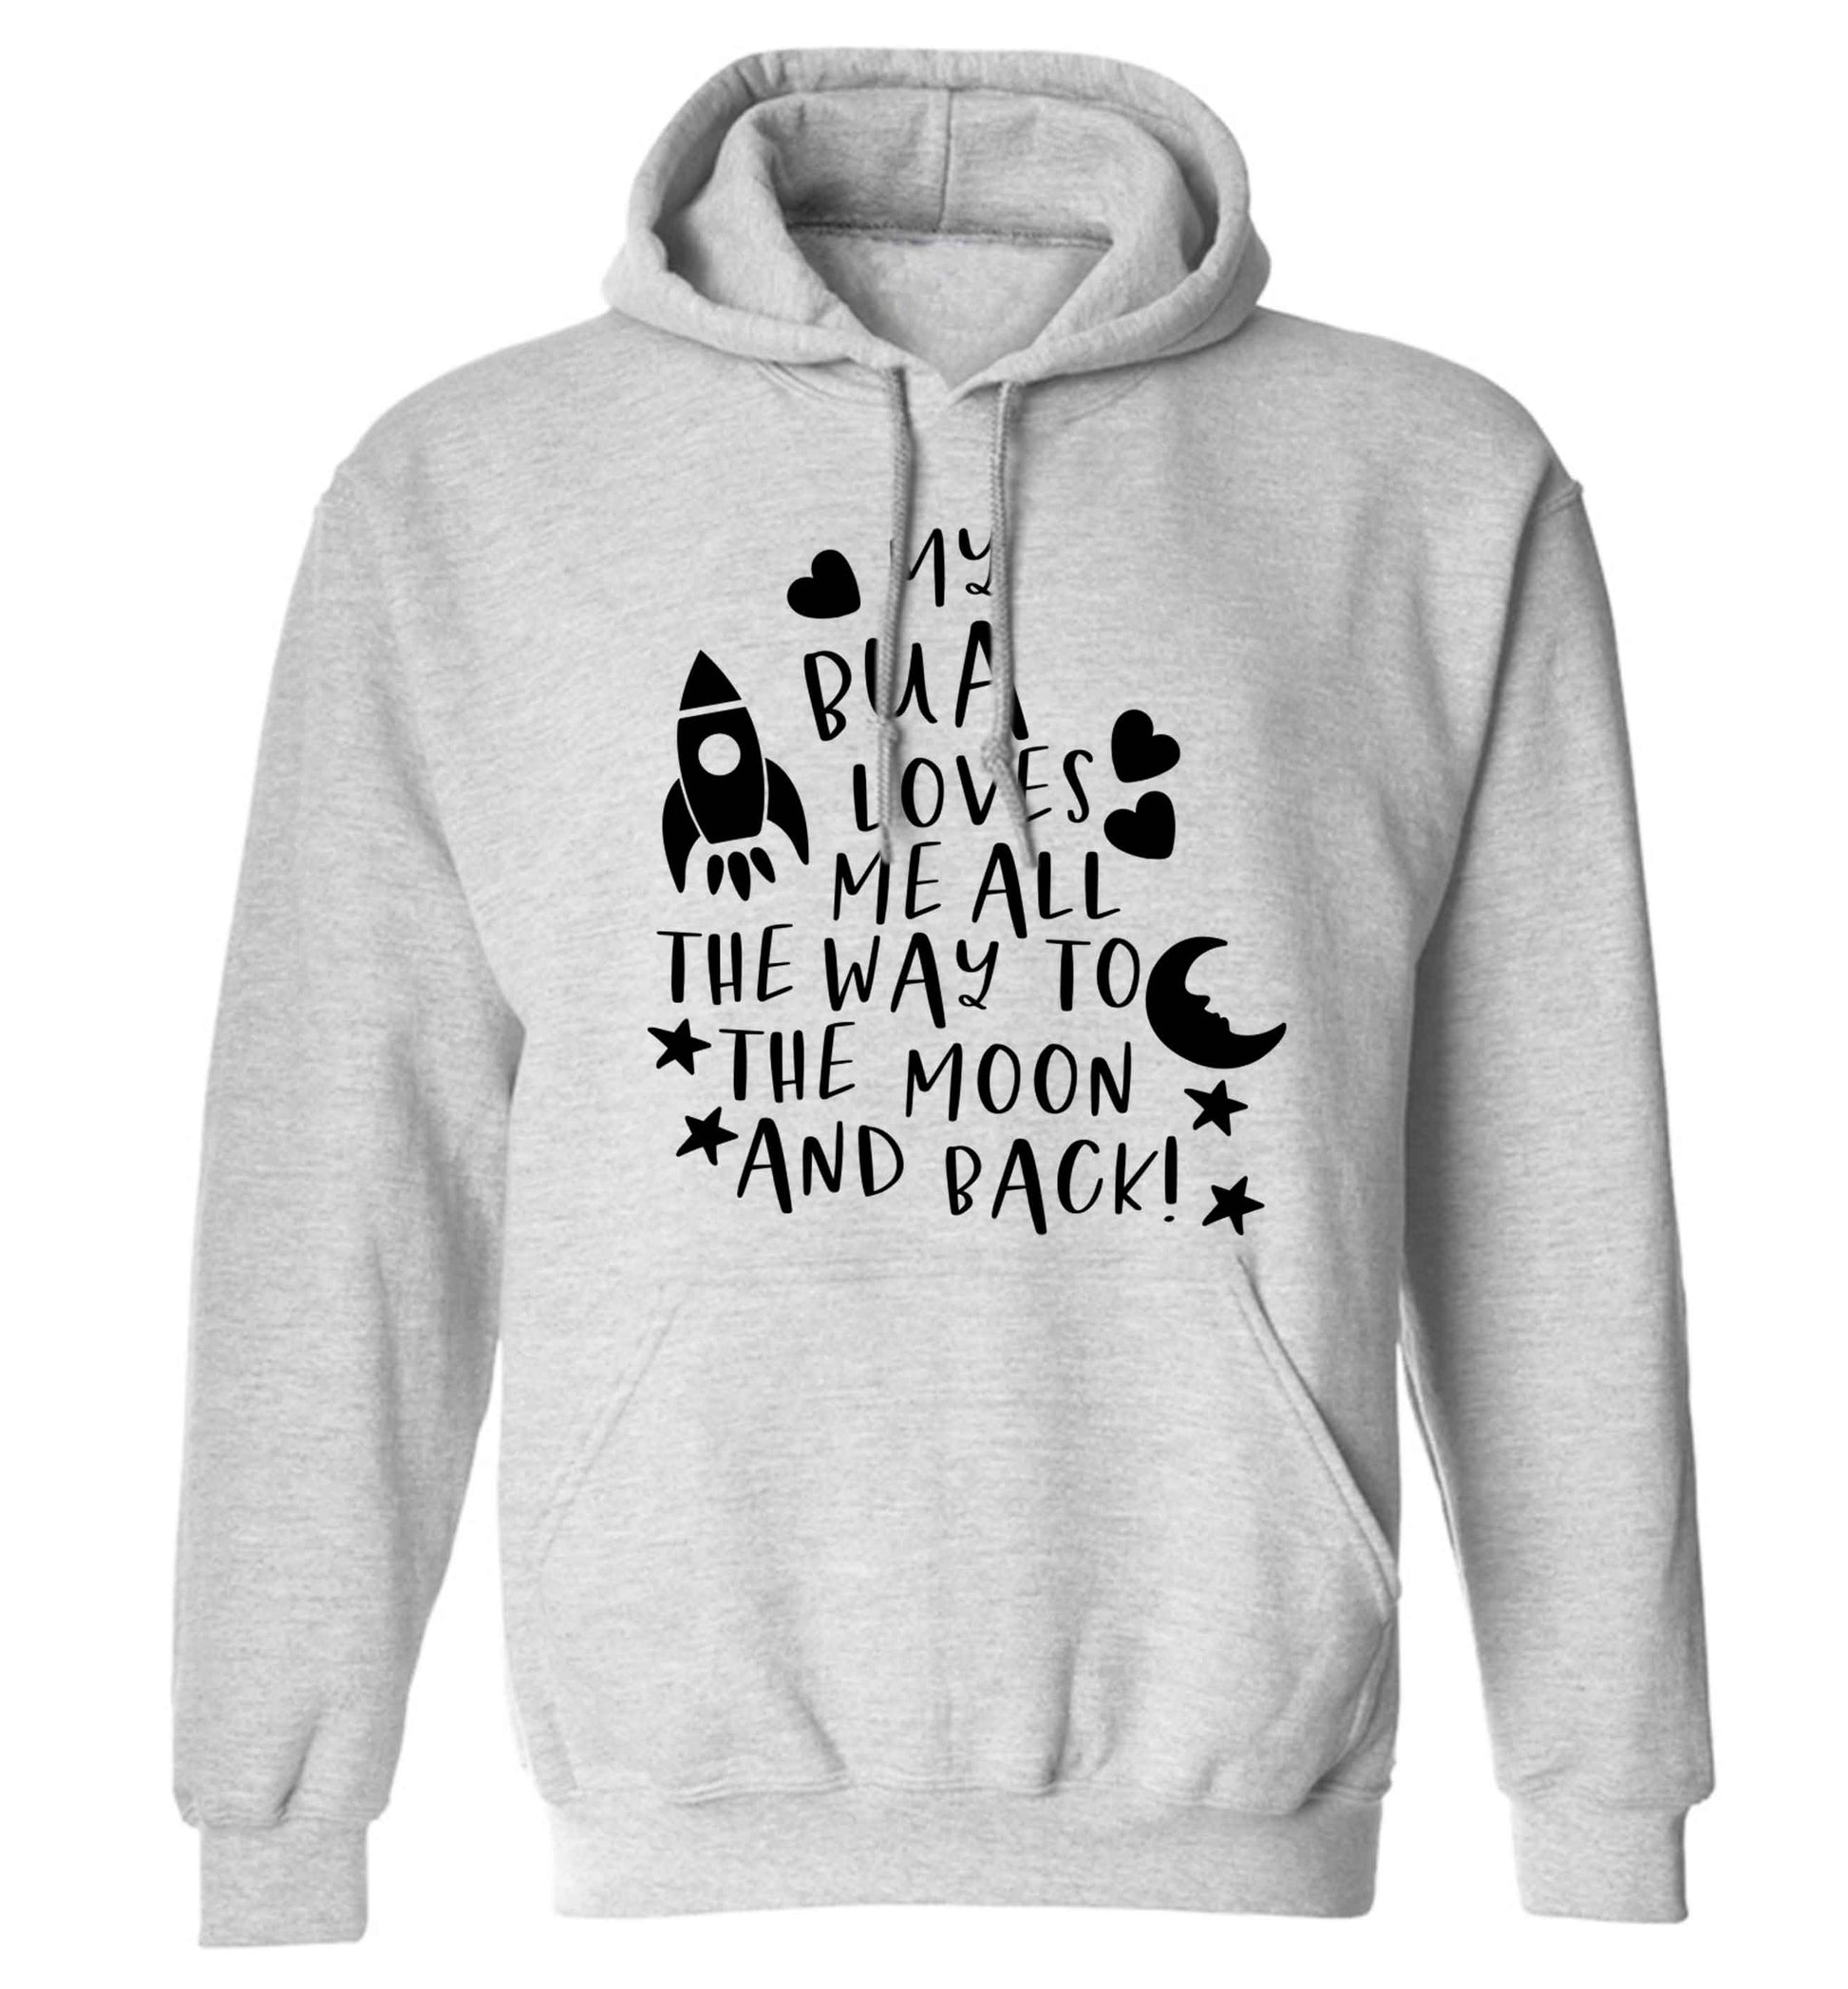 My bua loves me all they way to the moon and back adults unisex grey hoodie 2XL